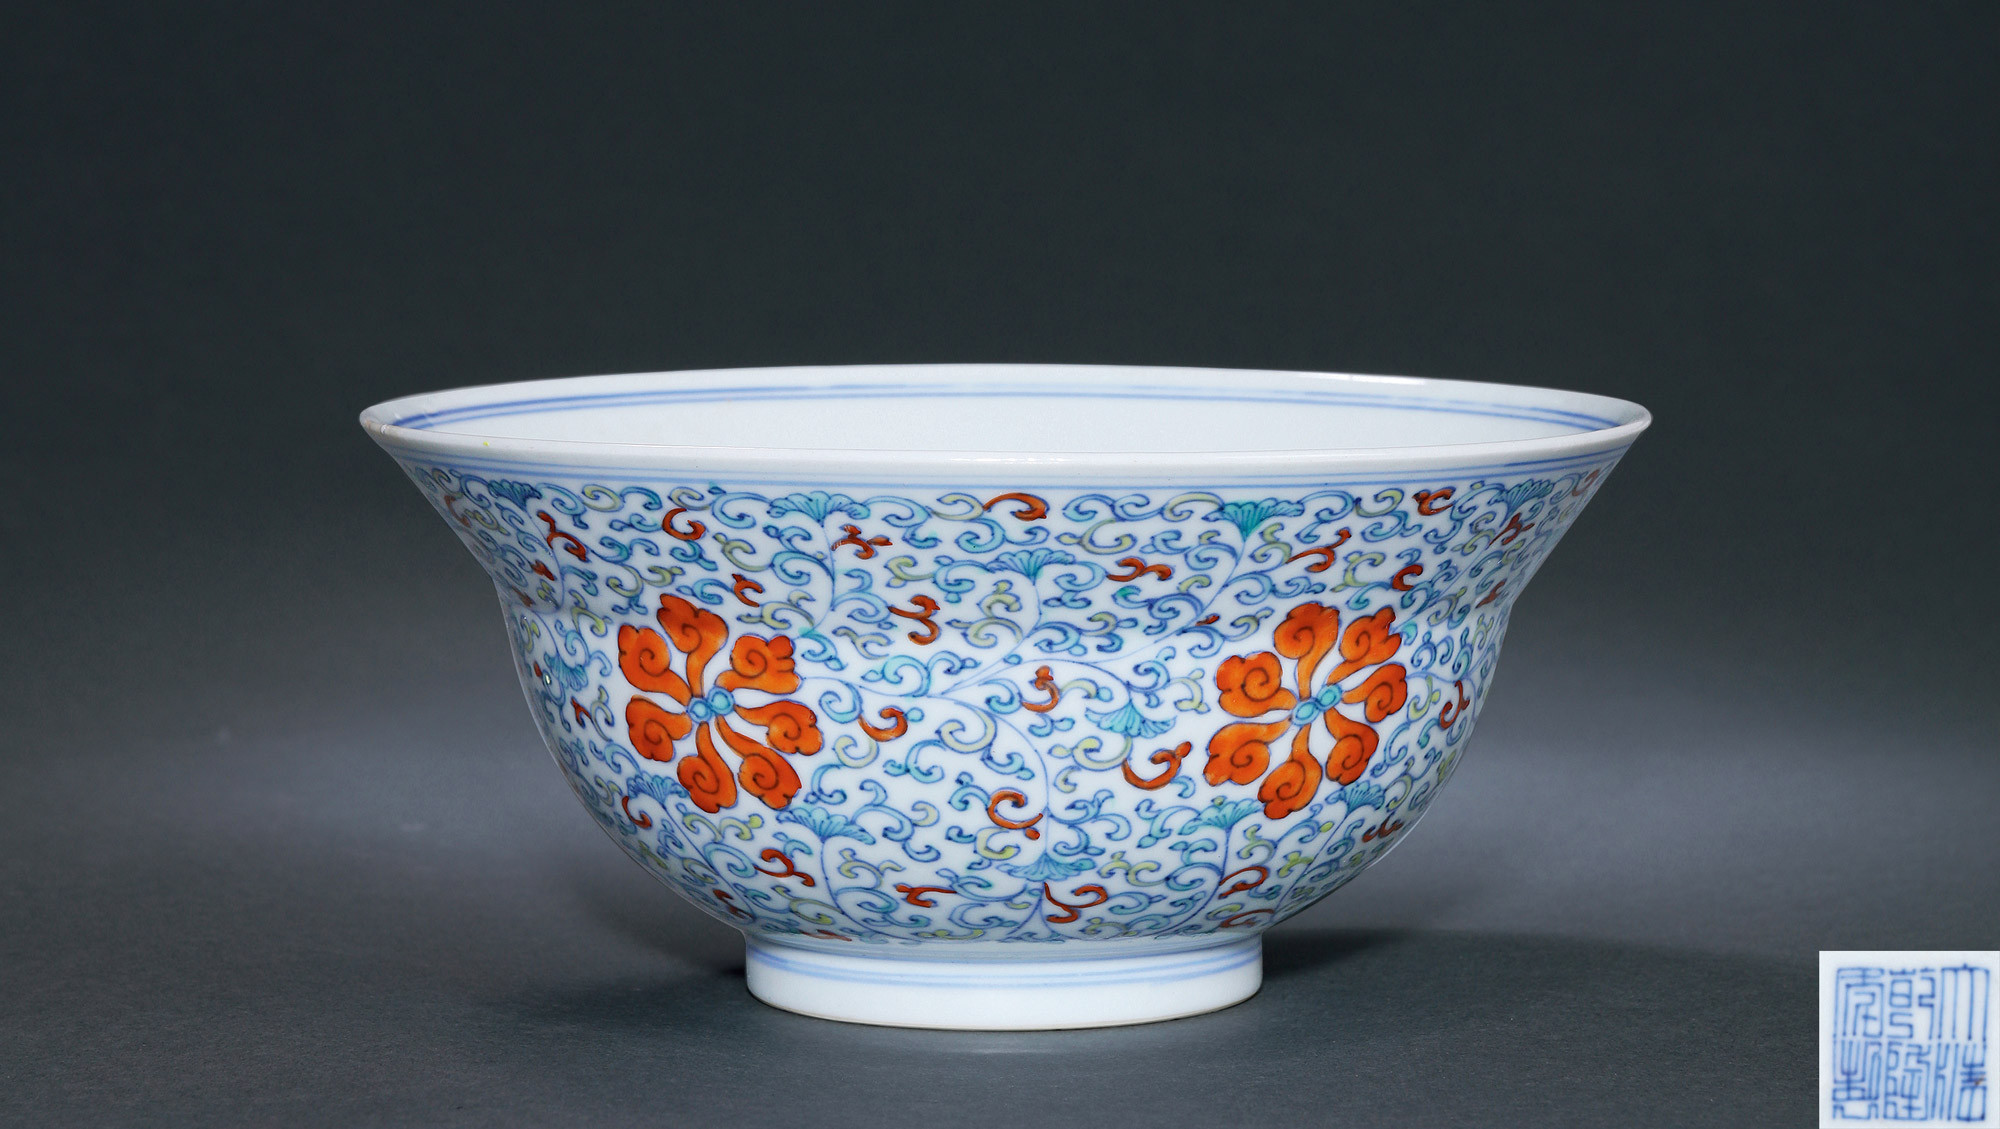 A BLUE AND WHITE WITH CONTENDING COLORS BOWL WITH FLOWERS DESIGN